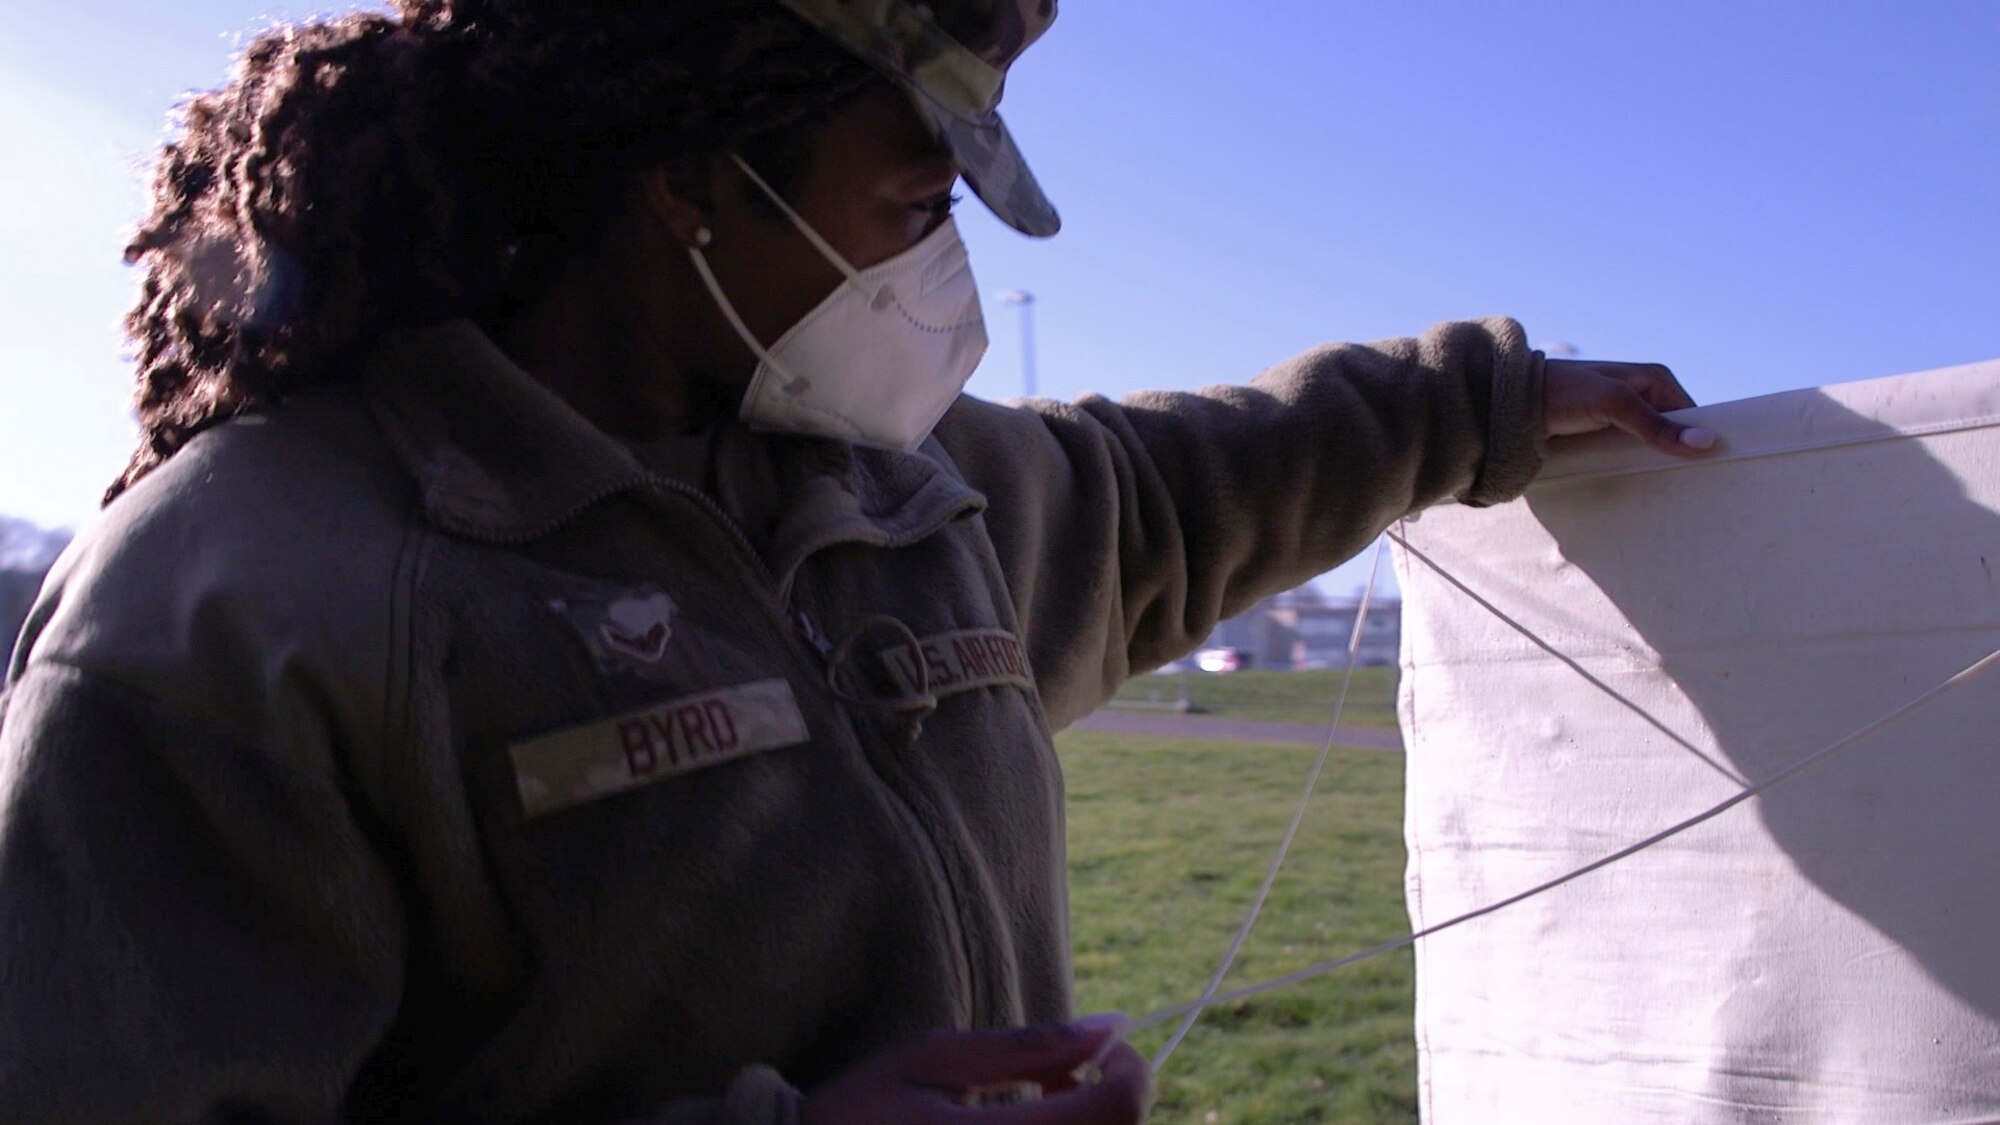 U.S. Air Force Airman 1st Class Arbryonna Byrd, 52nd Medical Group Public Health technician, looks over a tick drag at Spangdahlem Air Base Germany, March 29, 2021. The Community Health section of Public Health has a medical entomology program that informs the public on what disease might come from potential vectors such as ticks and mosquitos in the area.  (U.S. Air Force photo by Tech. Sgt. Warren D. Spearman Jr.)